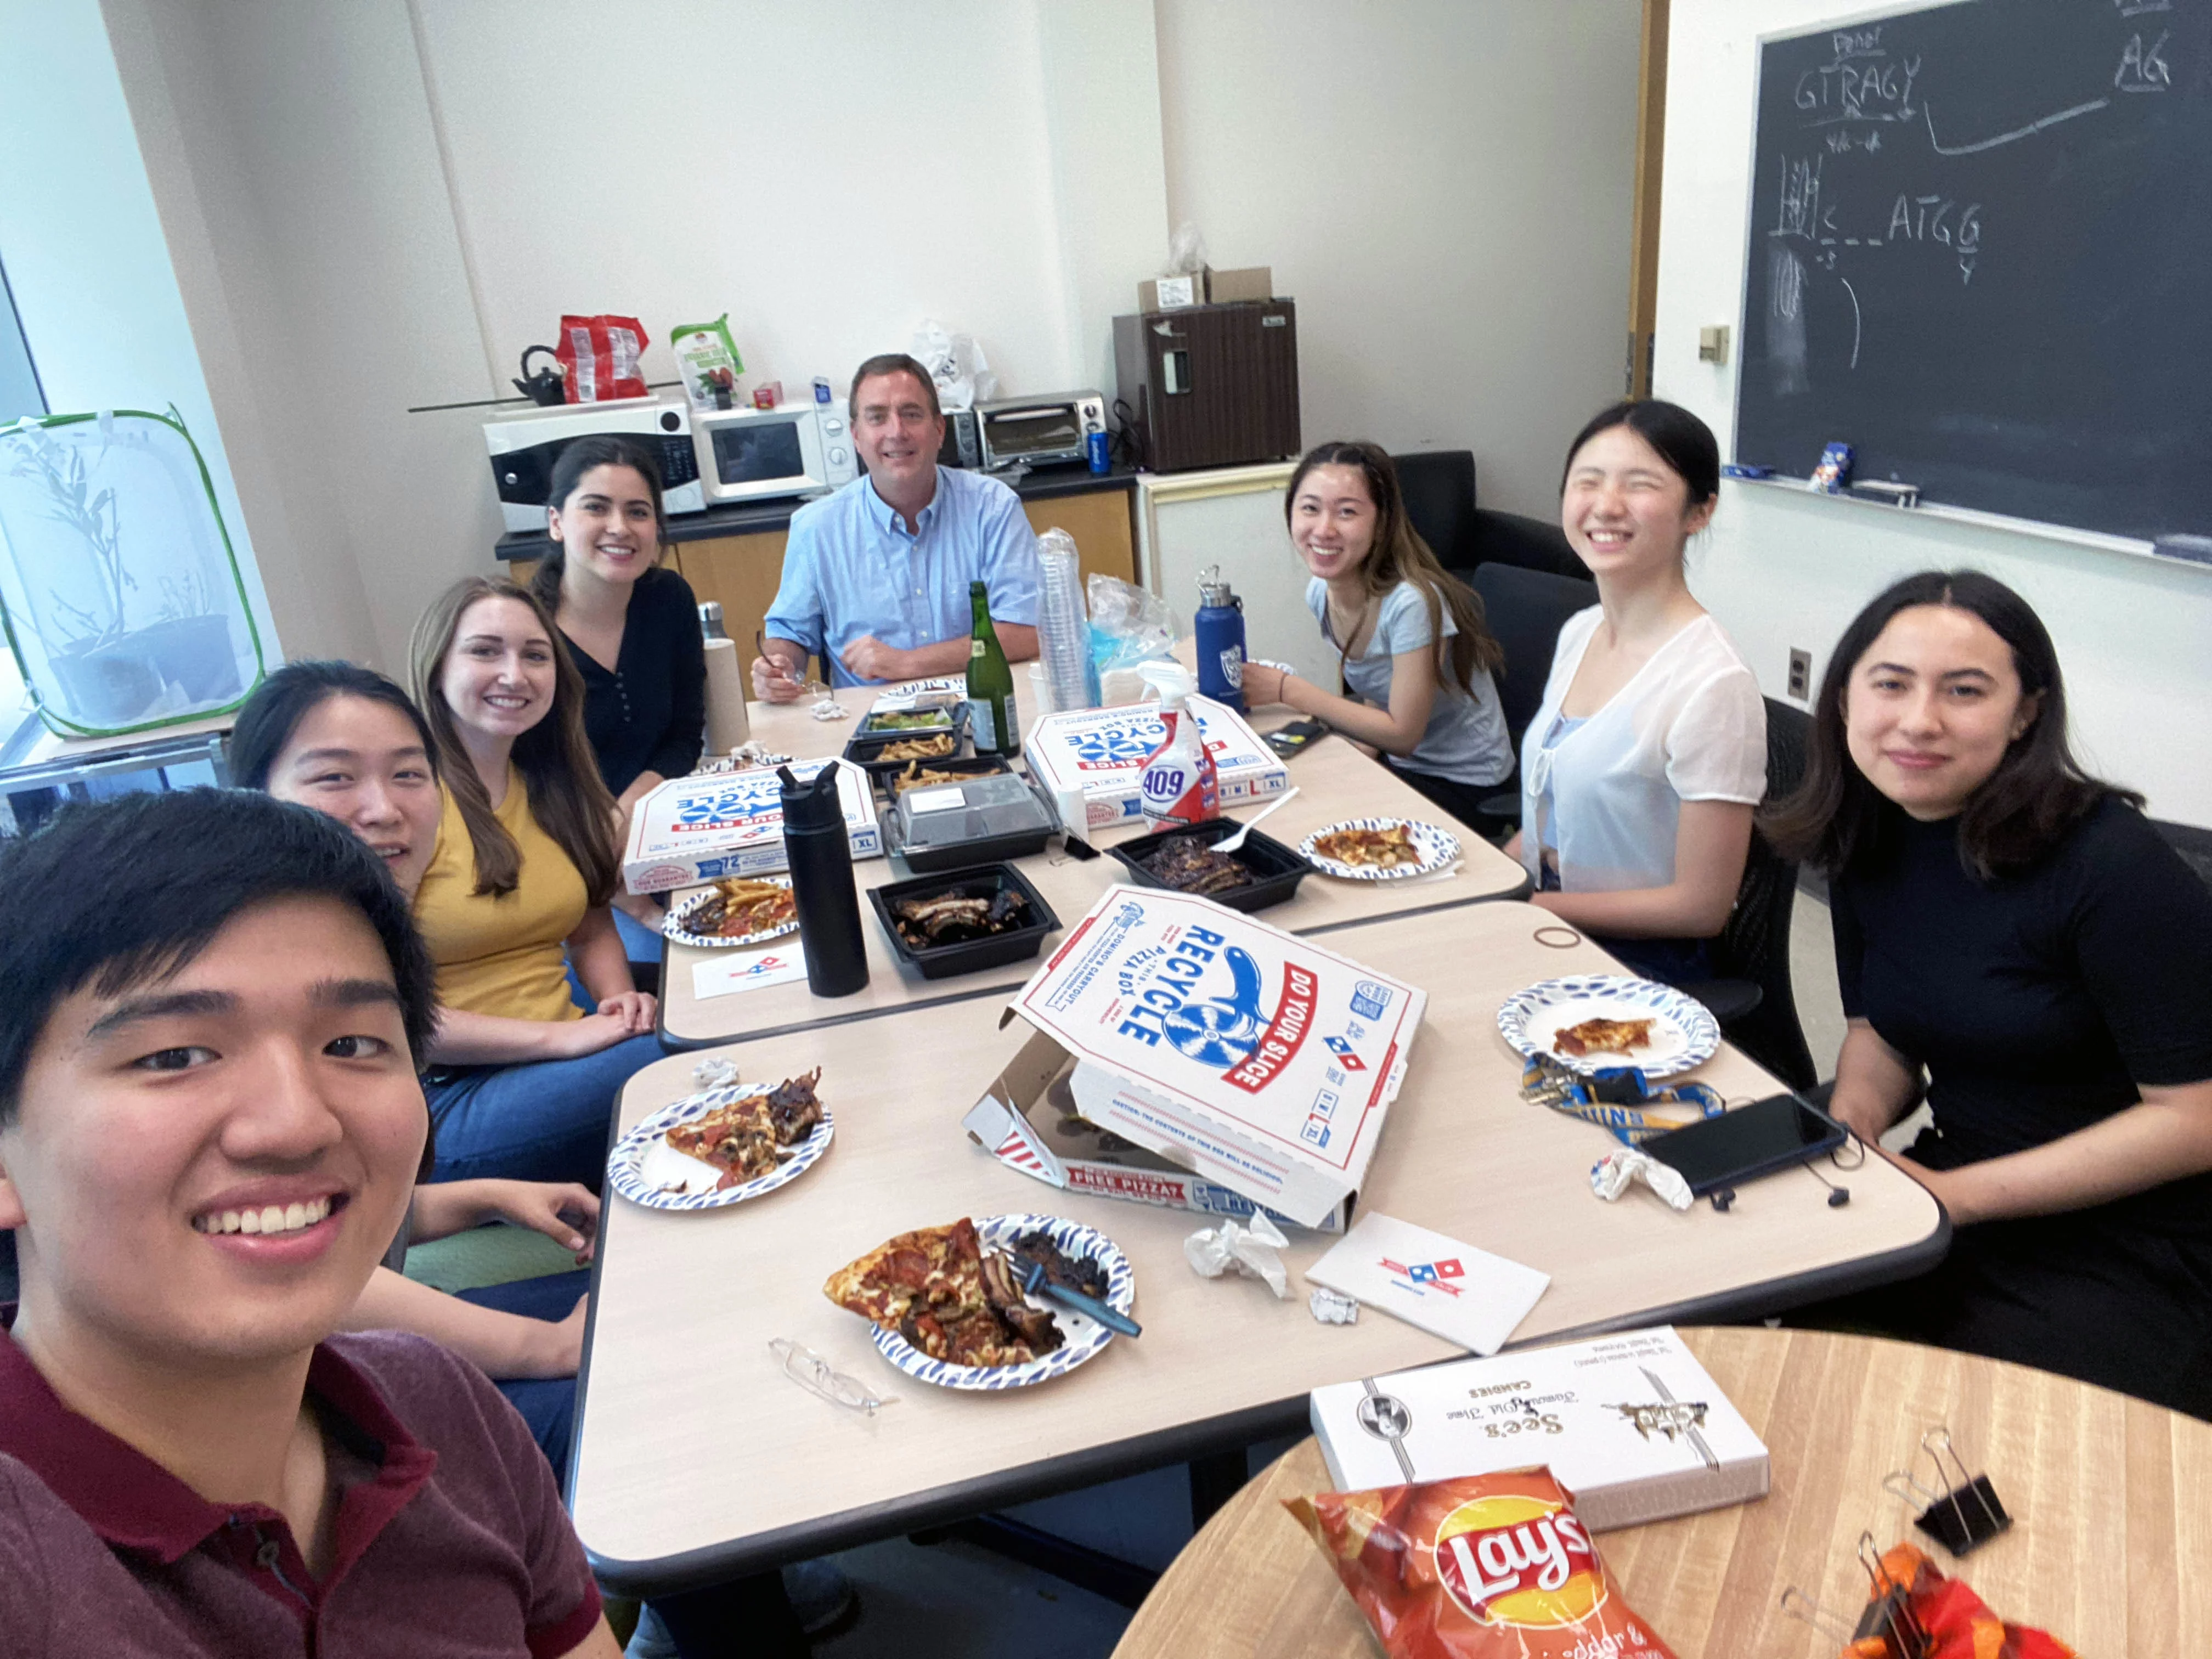 The entire lab celebrates our PI’s birthday with a pizza party.